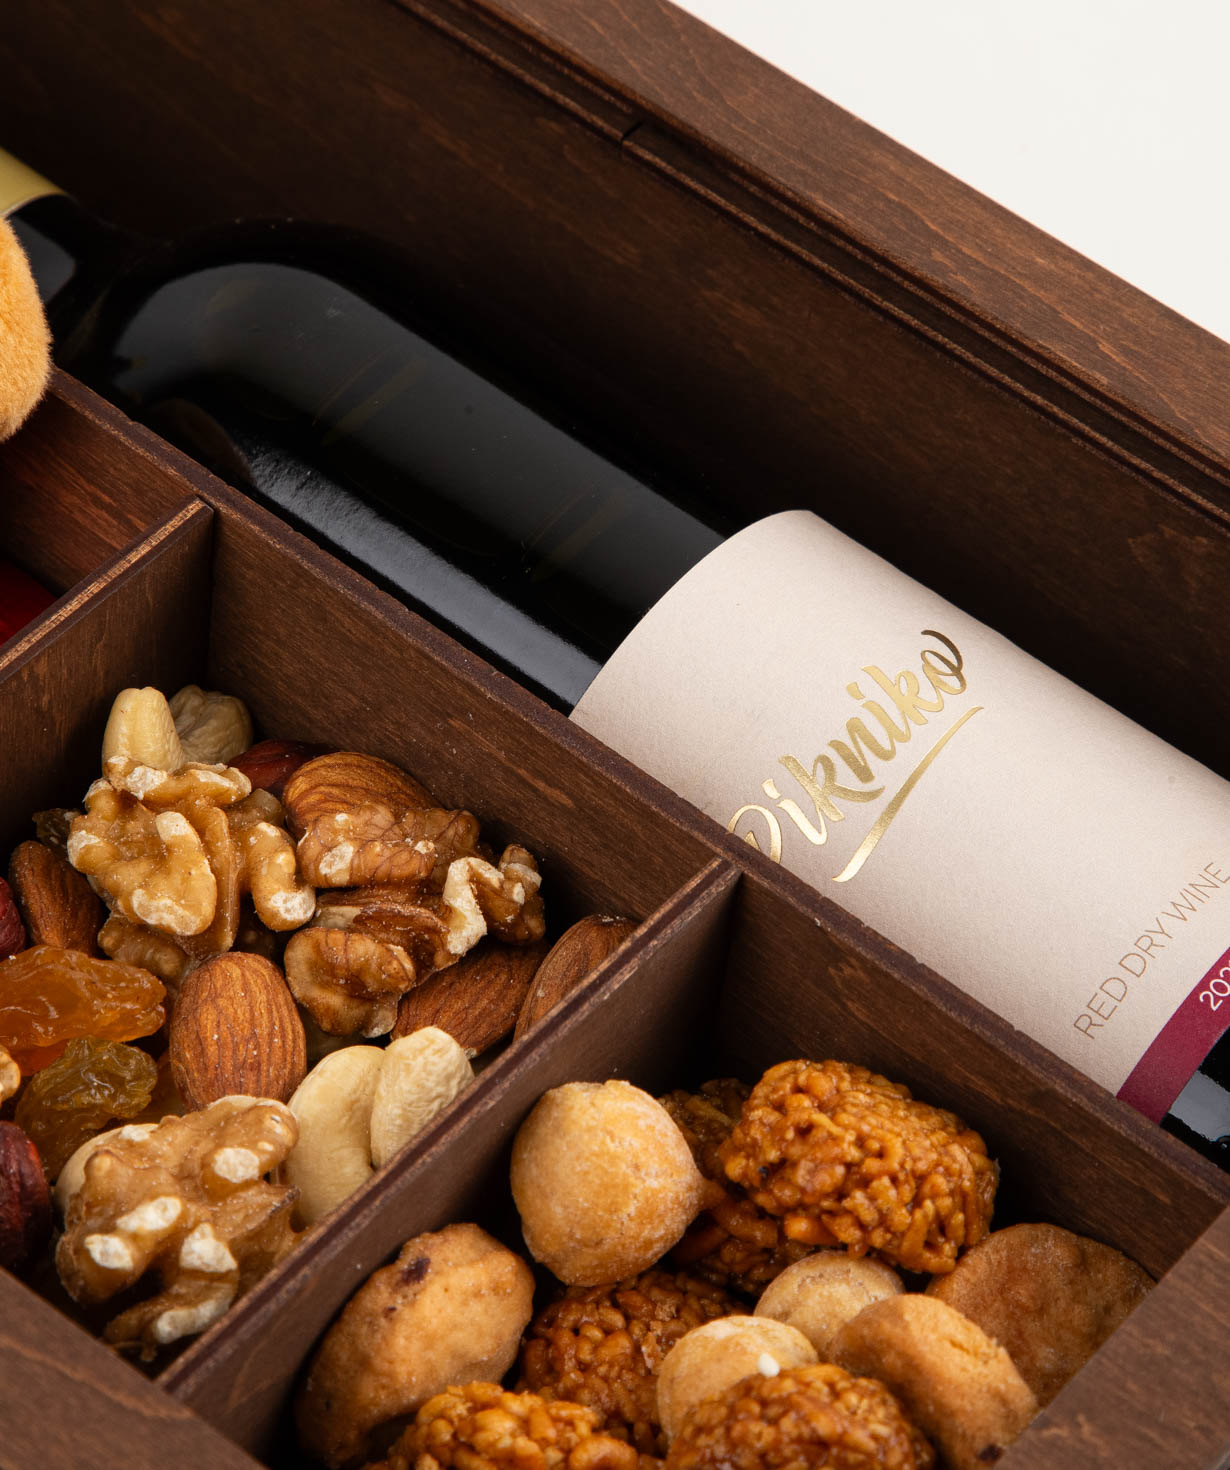 Gift box «Pikniko» with wine, sweets and a toy №2